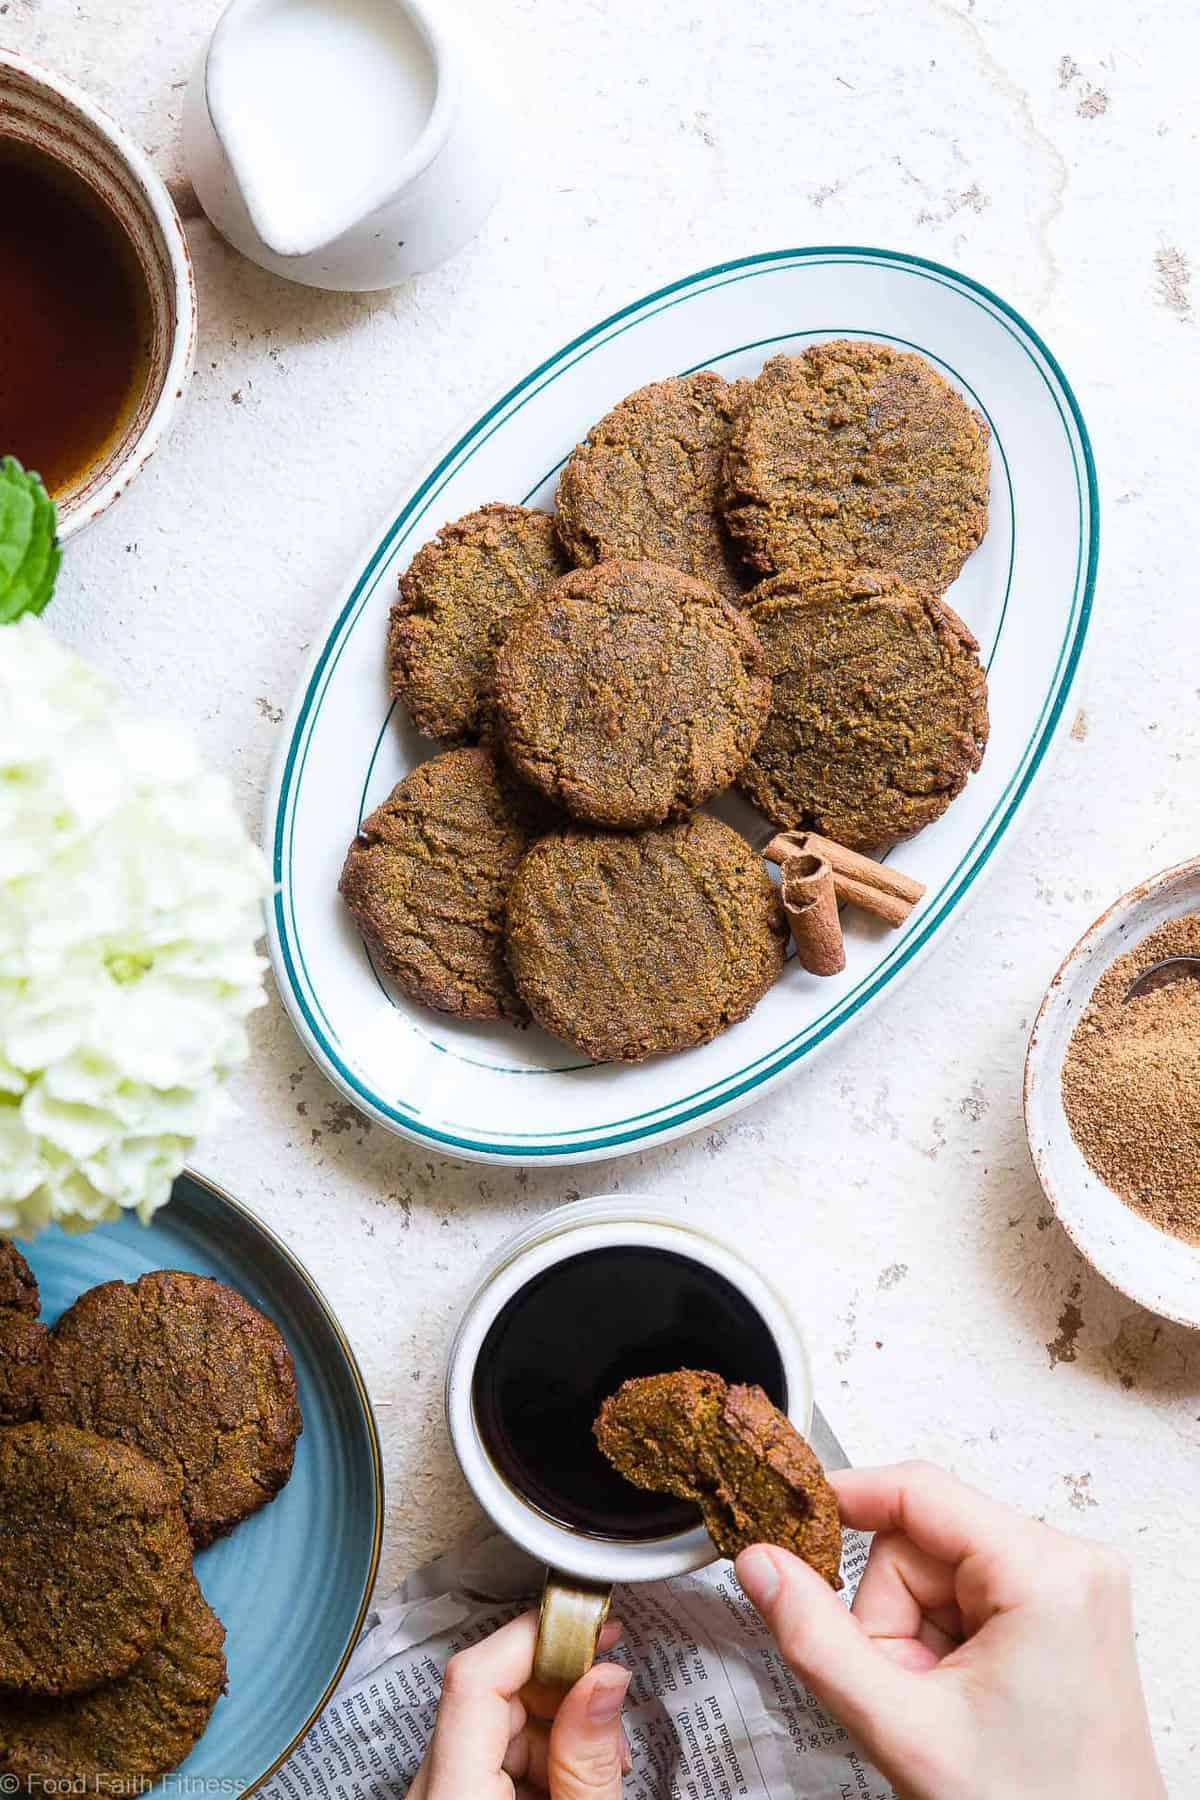 Hidden Veggie Paleo Breakfast Cookies - These Paleo Breakfast Cookies are made in the food processor for a quick, easy and healthy breakfast!  Gluten/grain/dairy/egg free, vegan friendly and DELICIOUS! Even picky kiddos won't taste the hidden veggies! | #Foodfaithfitness | #Glutenfree #Paleo #Vegan #Dairyfree #EggFree